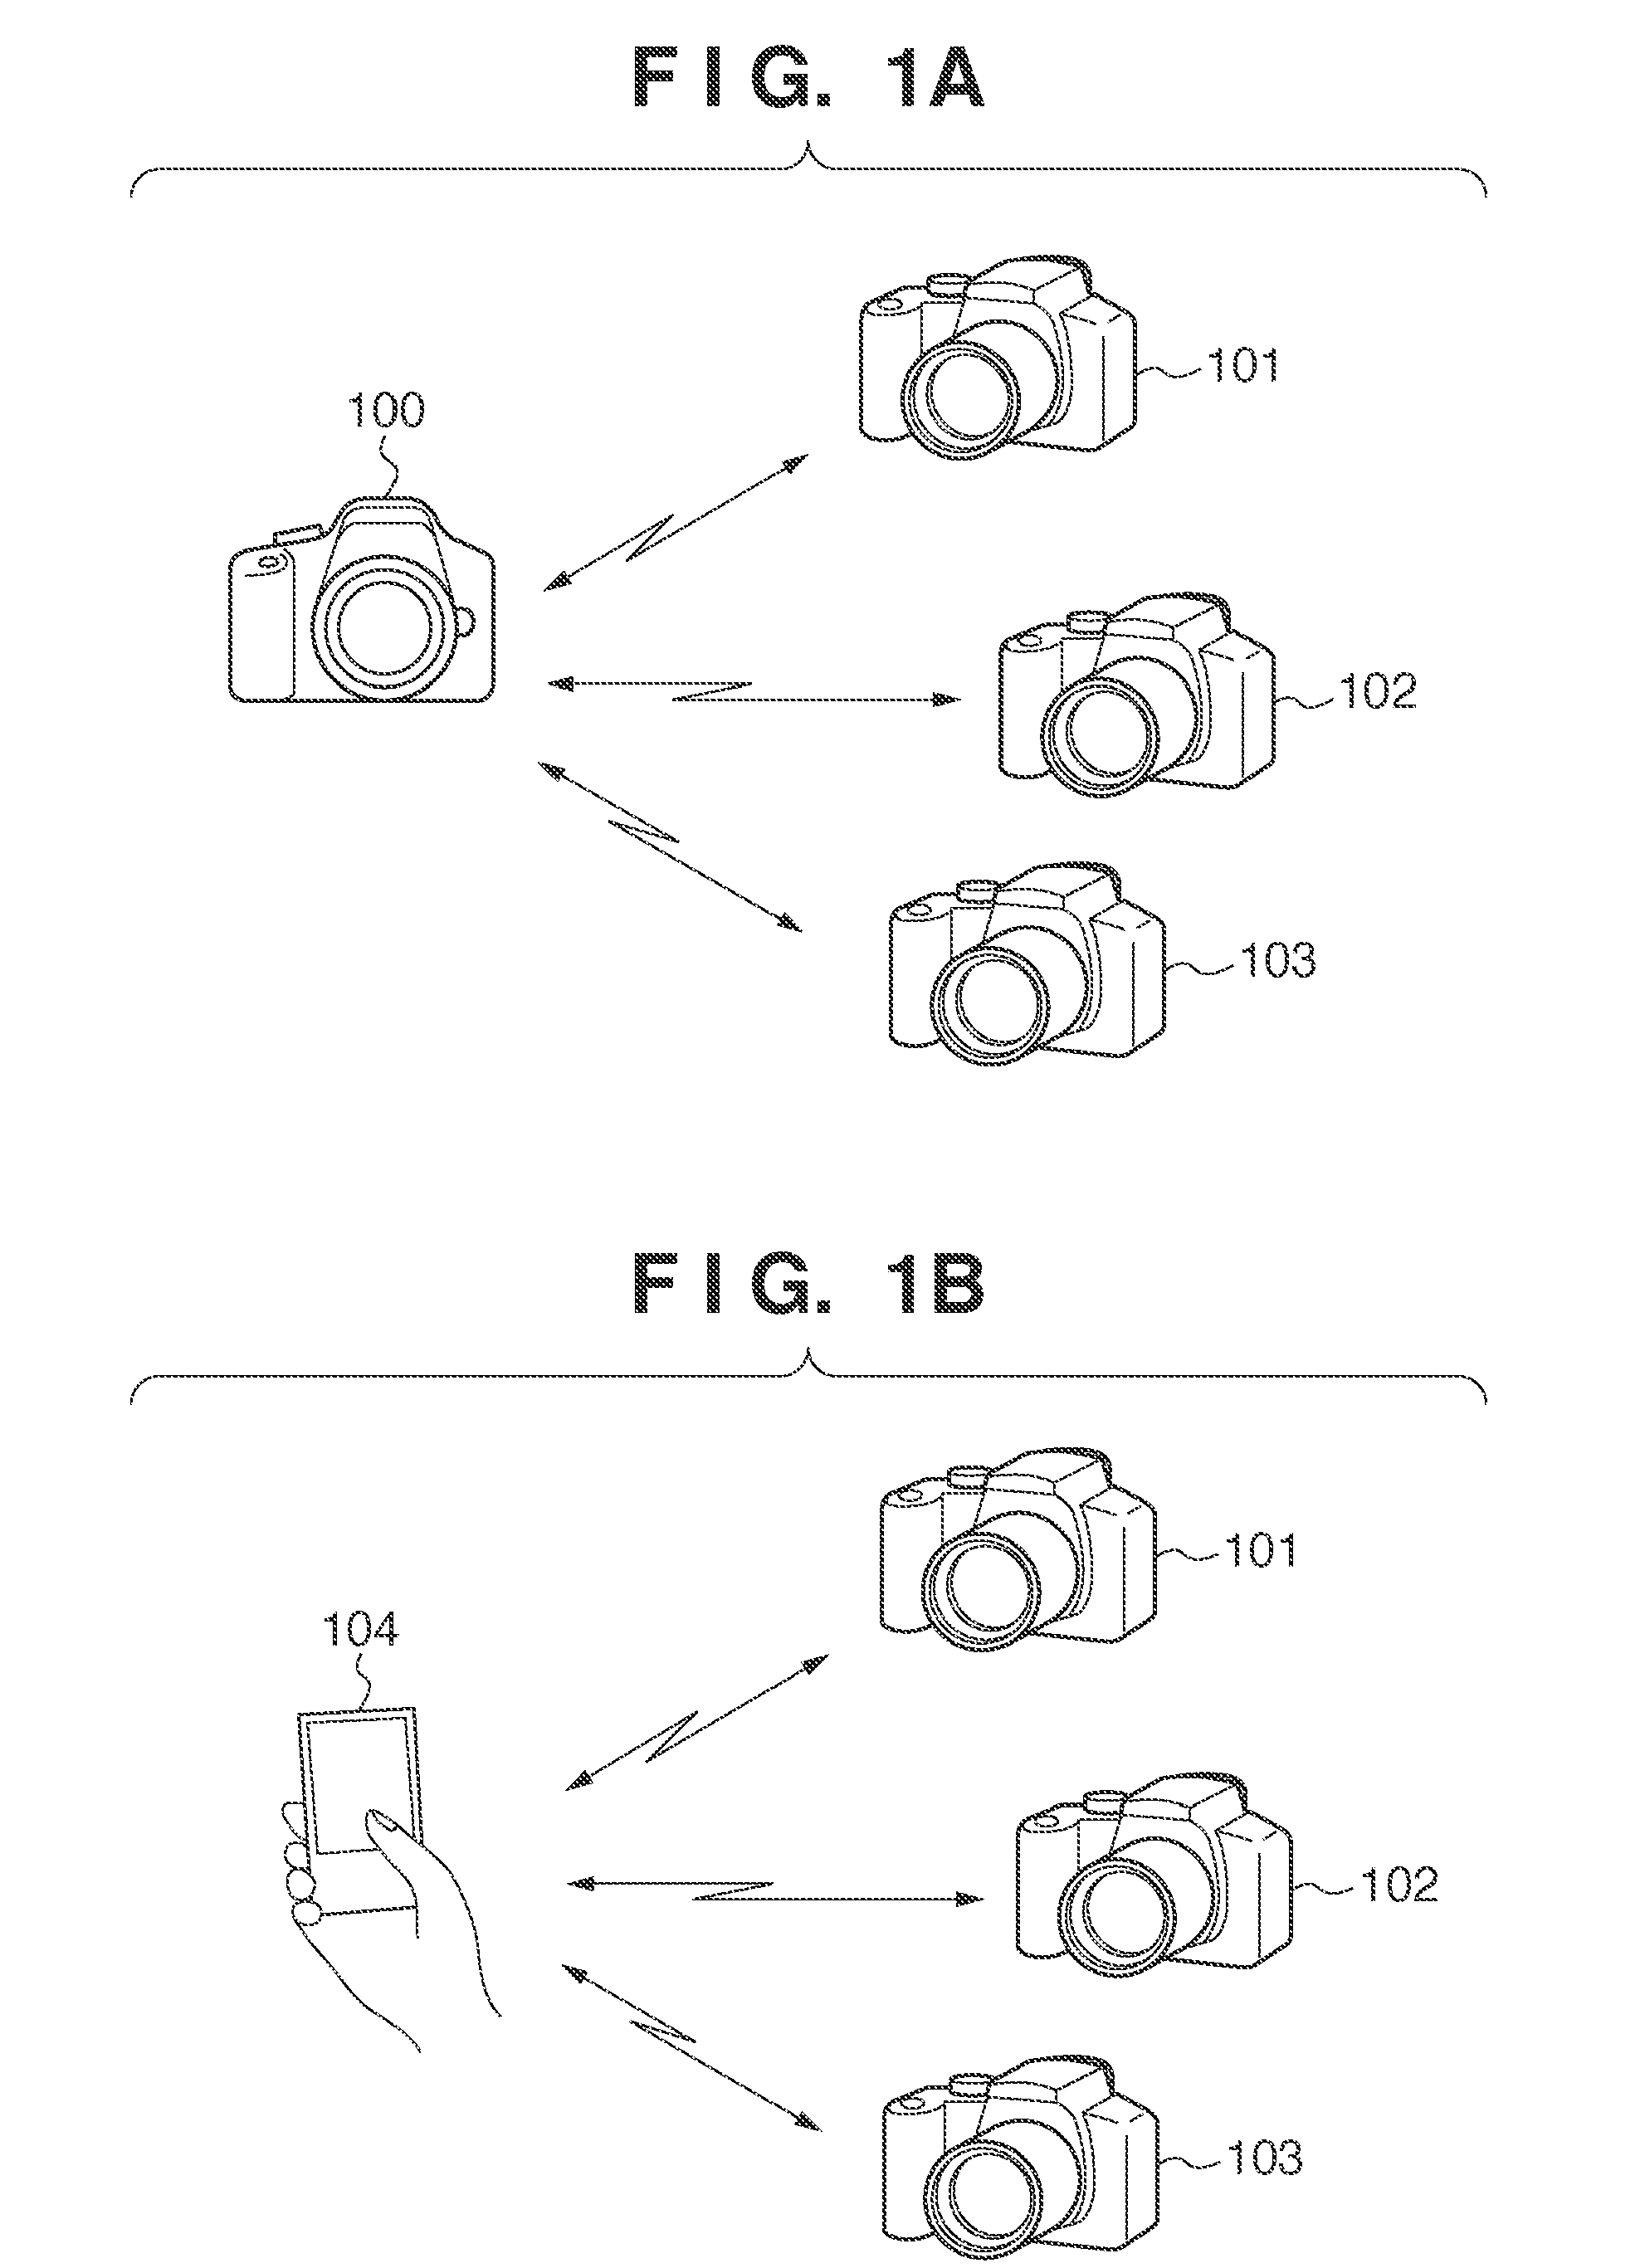 Control apparatus, control system, command transmission method, and non-transitory computer-readable storage medium